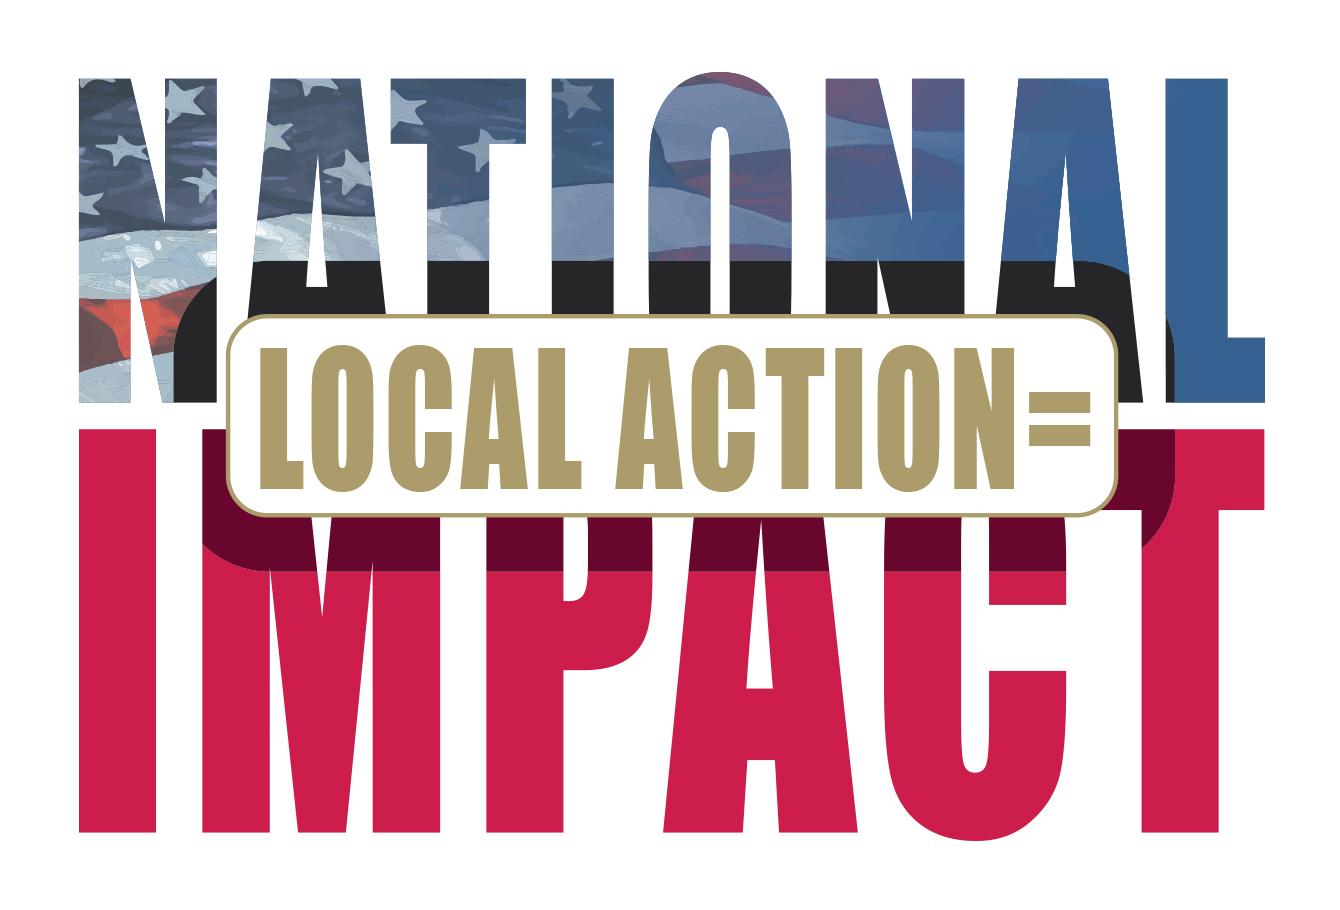 Local Action = National Impact